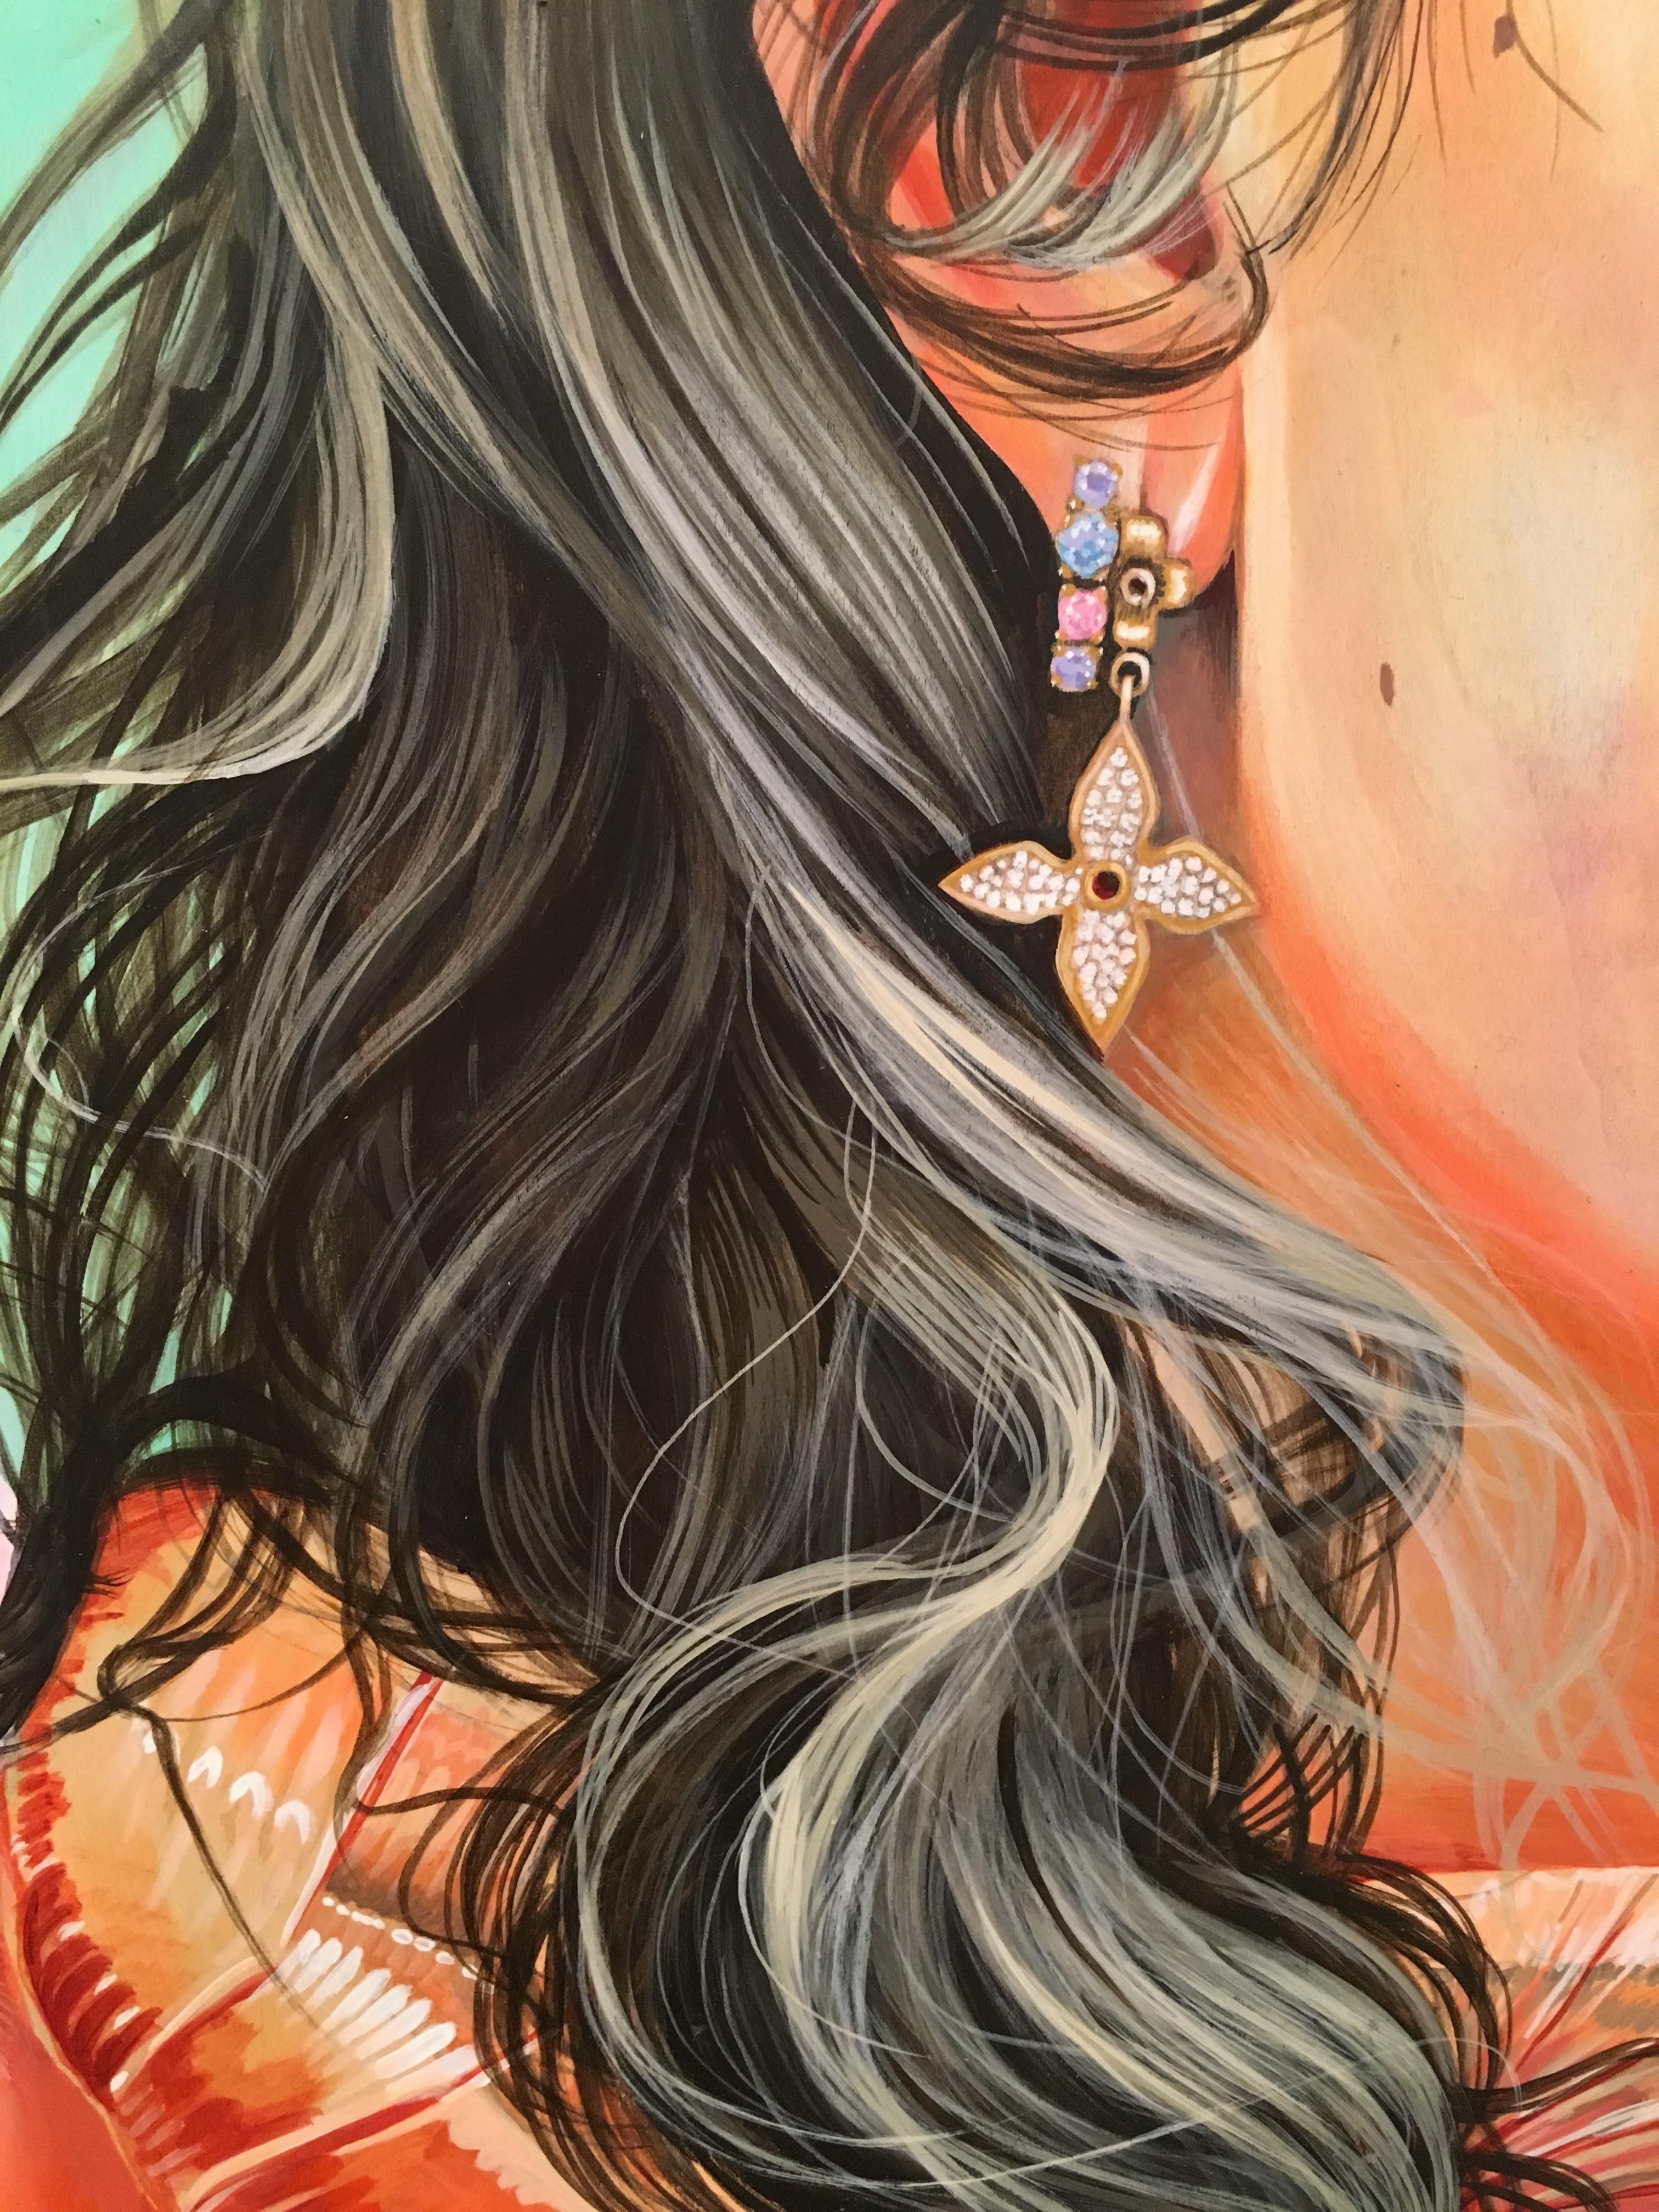 Sink in Sound, acrylic on panel - Painting by Martine Johanna